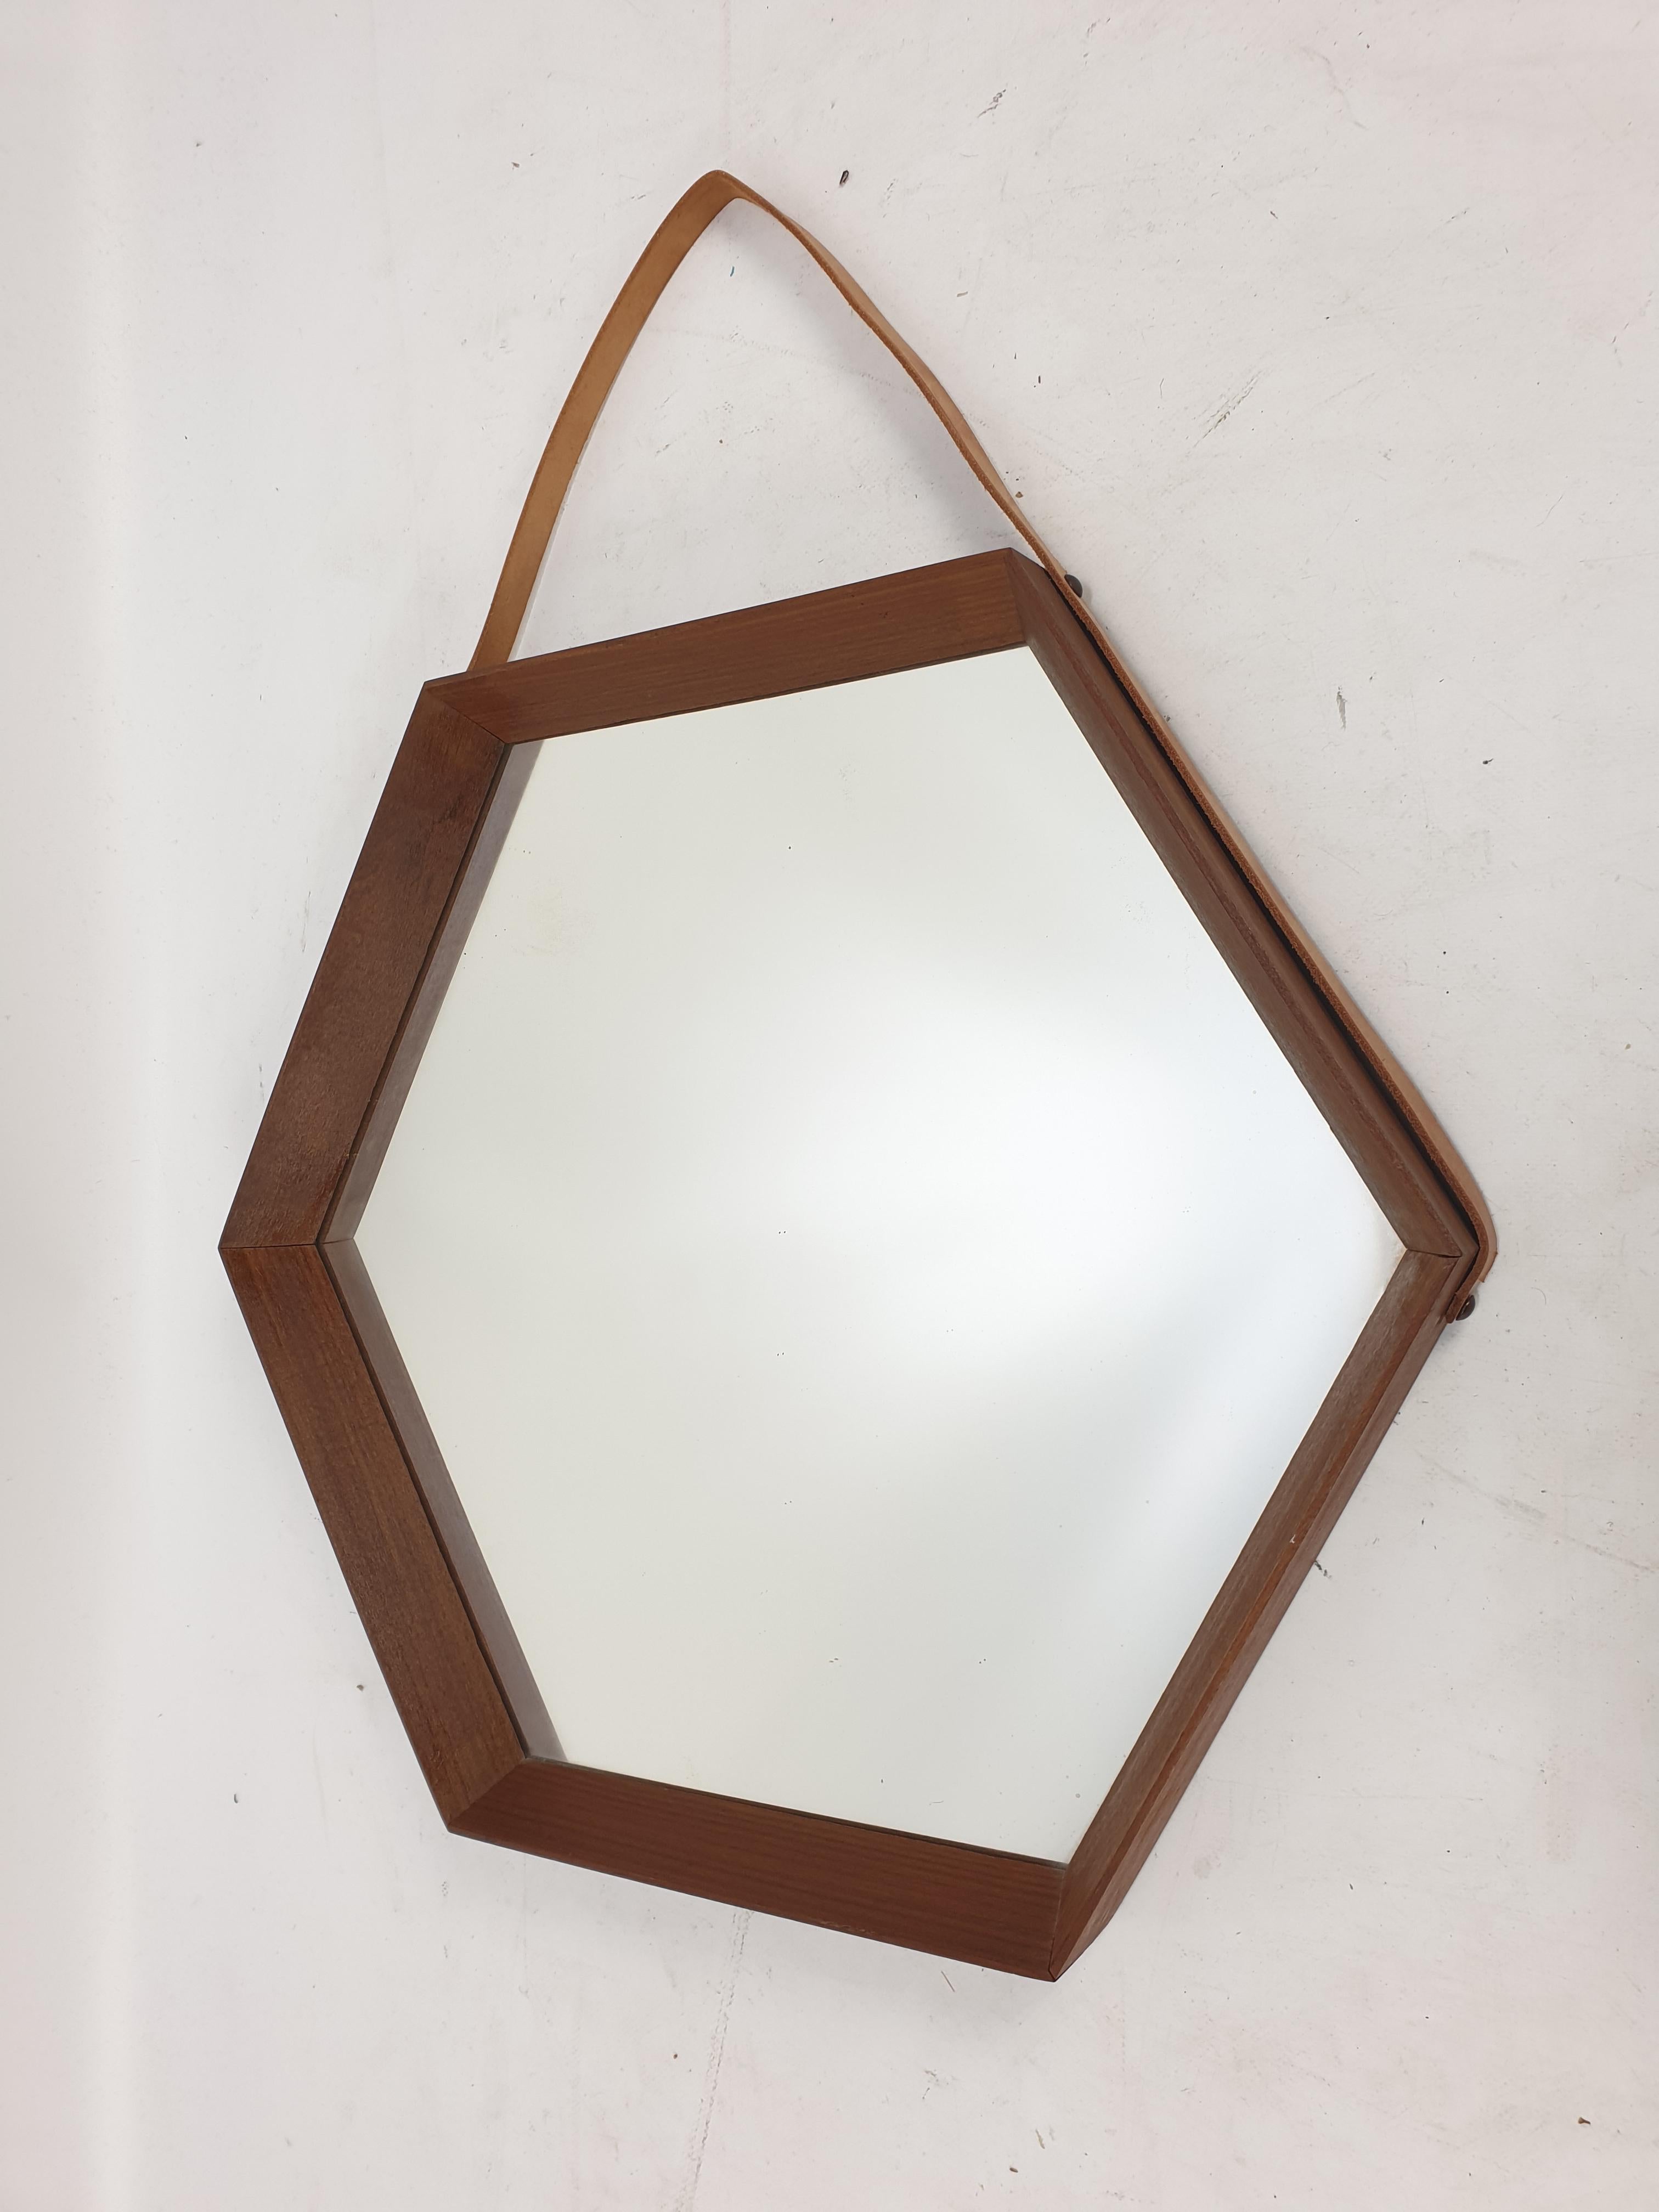 Beautiful and elegant wall mirror in dark teak wood. Made in Italy during the 1950s. To note the work of excellence of the execution of the frame. Smallest vintage signs of wear but no defects.